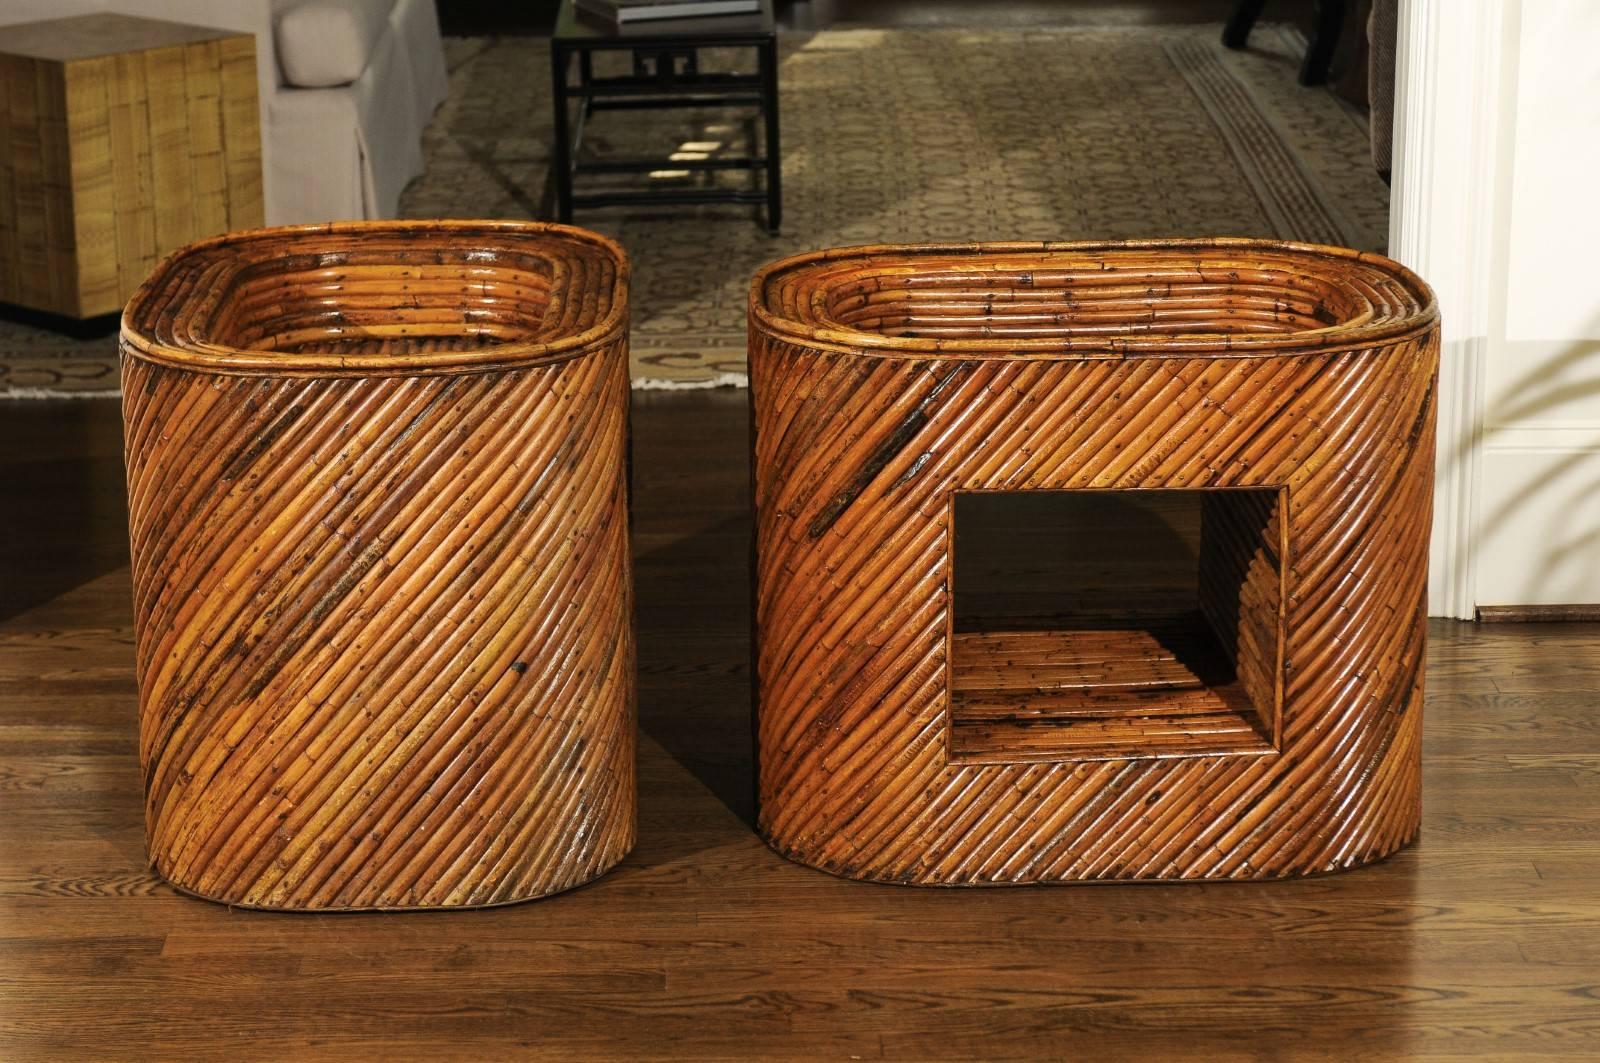 Exceptional Restored Pair of Bamboo Display End Tables, circa 1975 For Sale 7